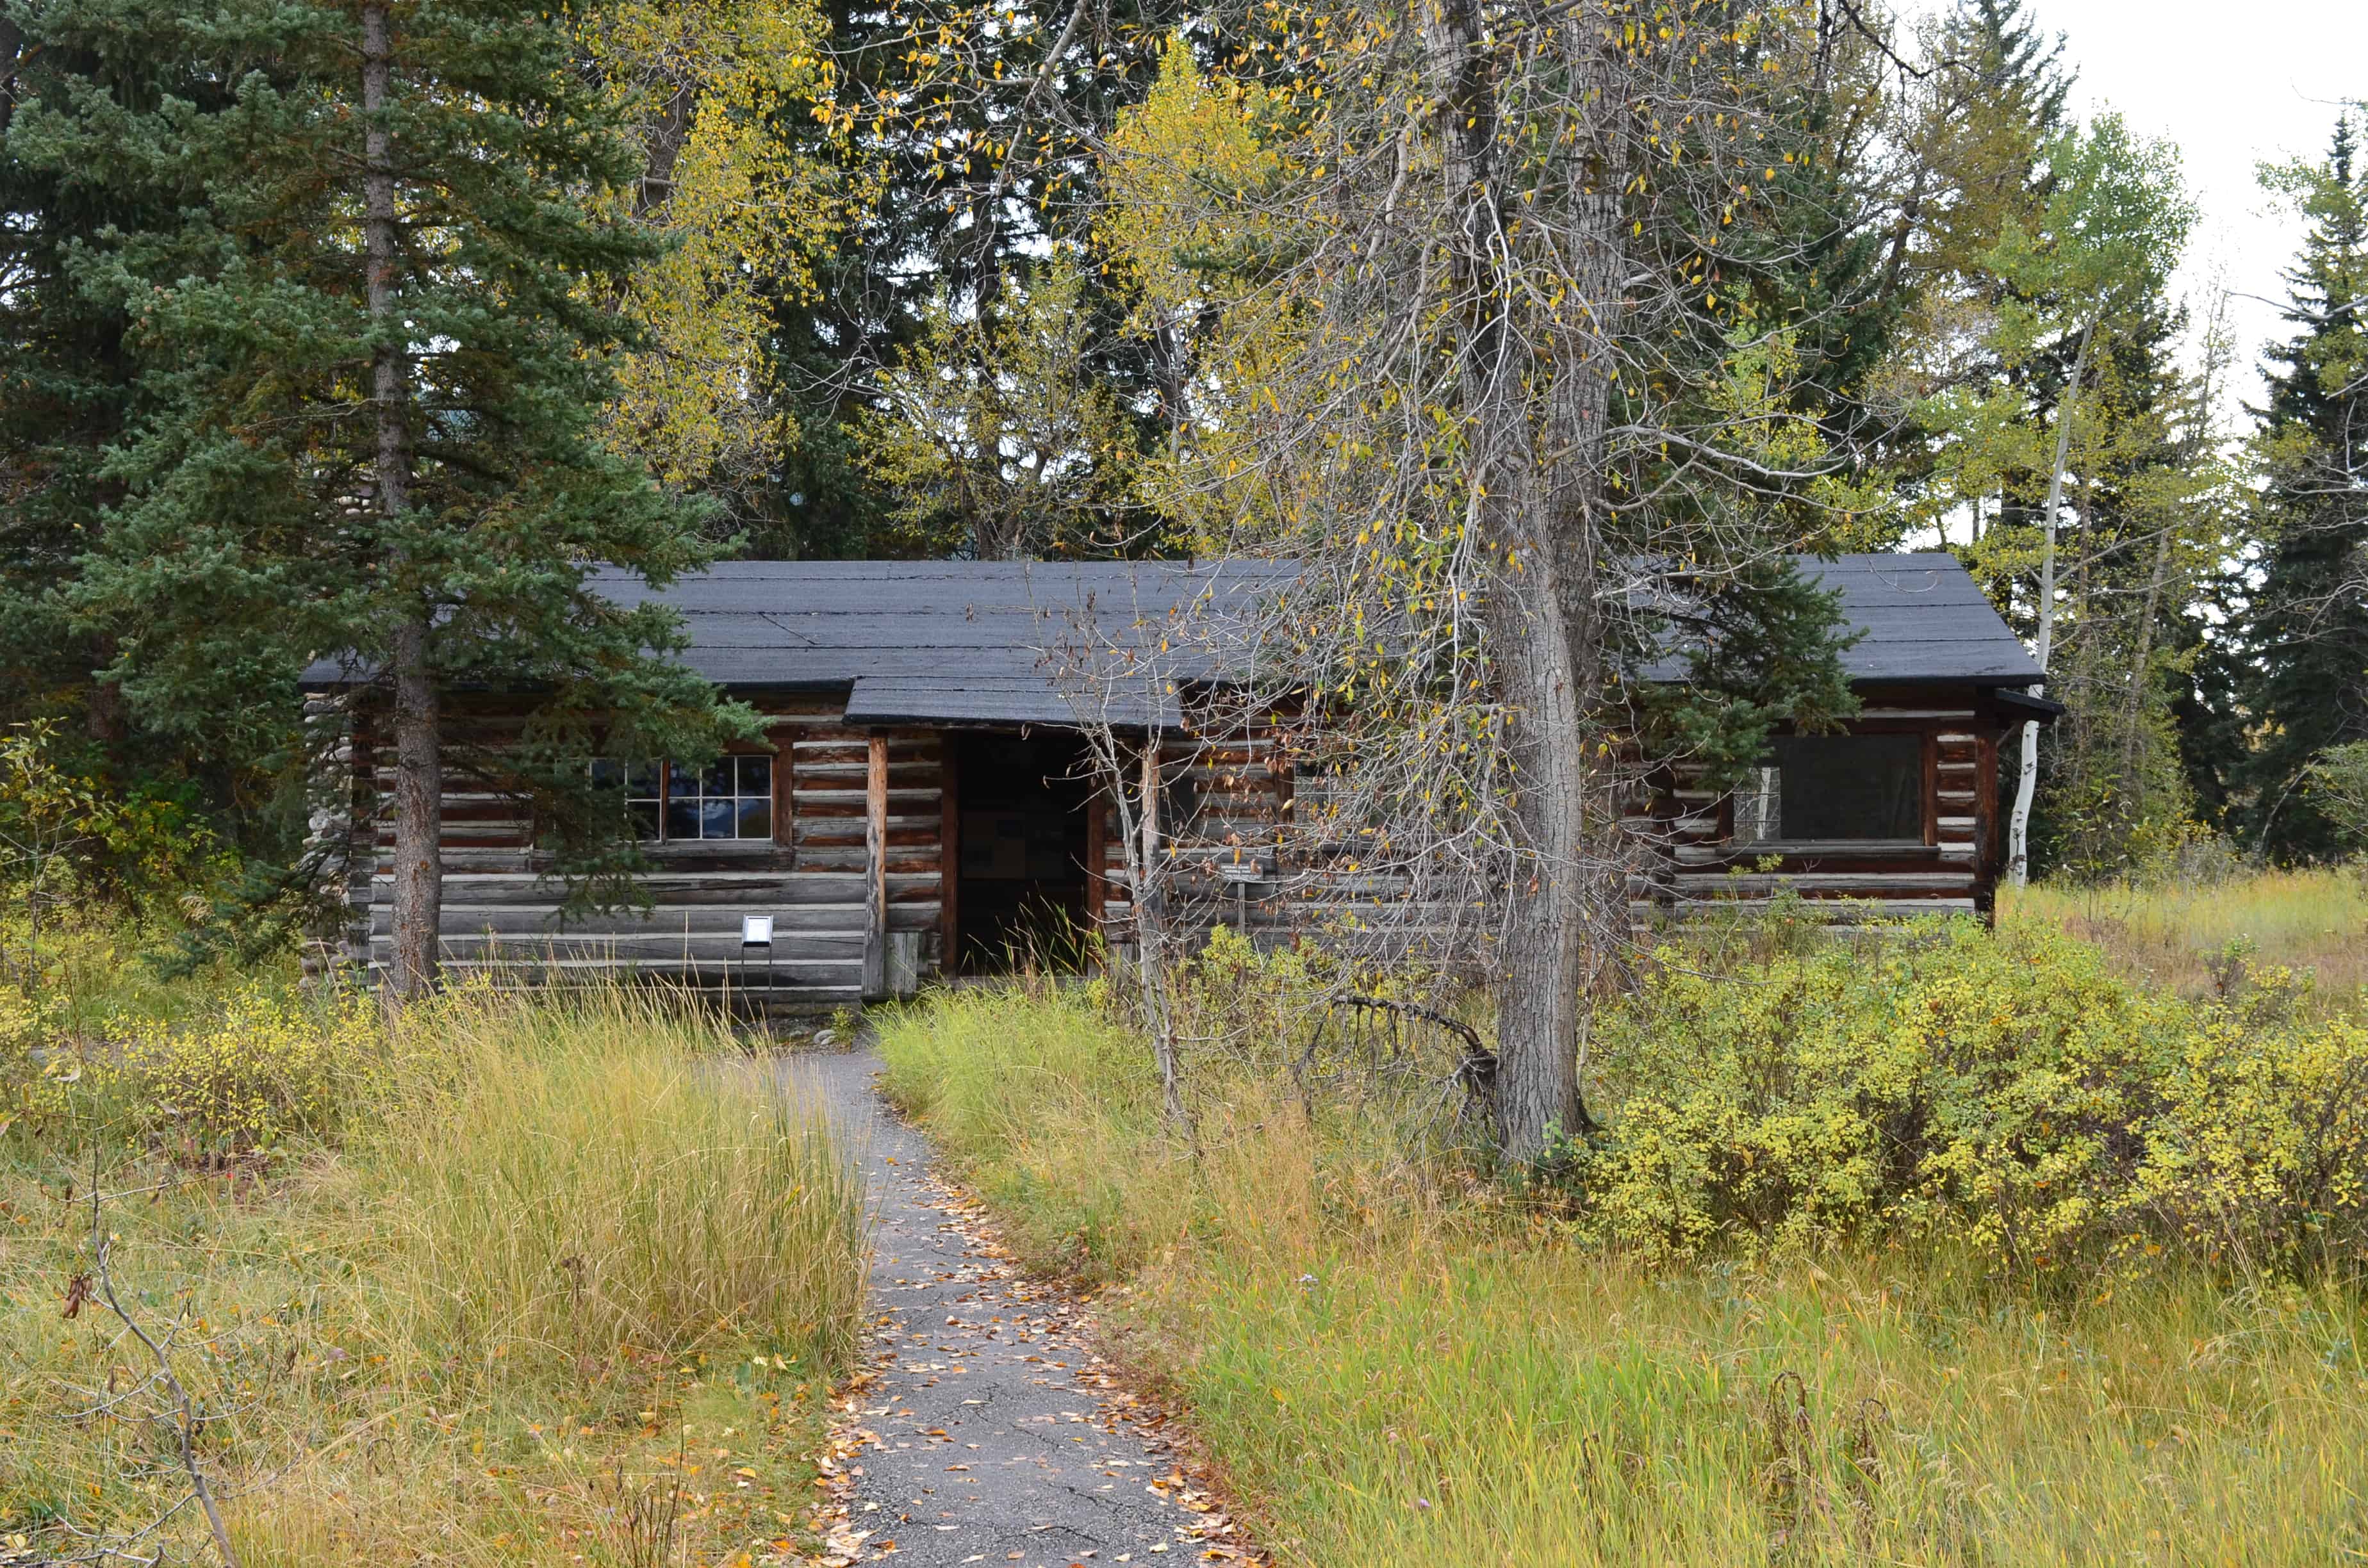 Maude Noble Cabin at Menor's Ferry Historic District in Grand Teton National Park, Wyoming